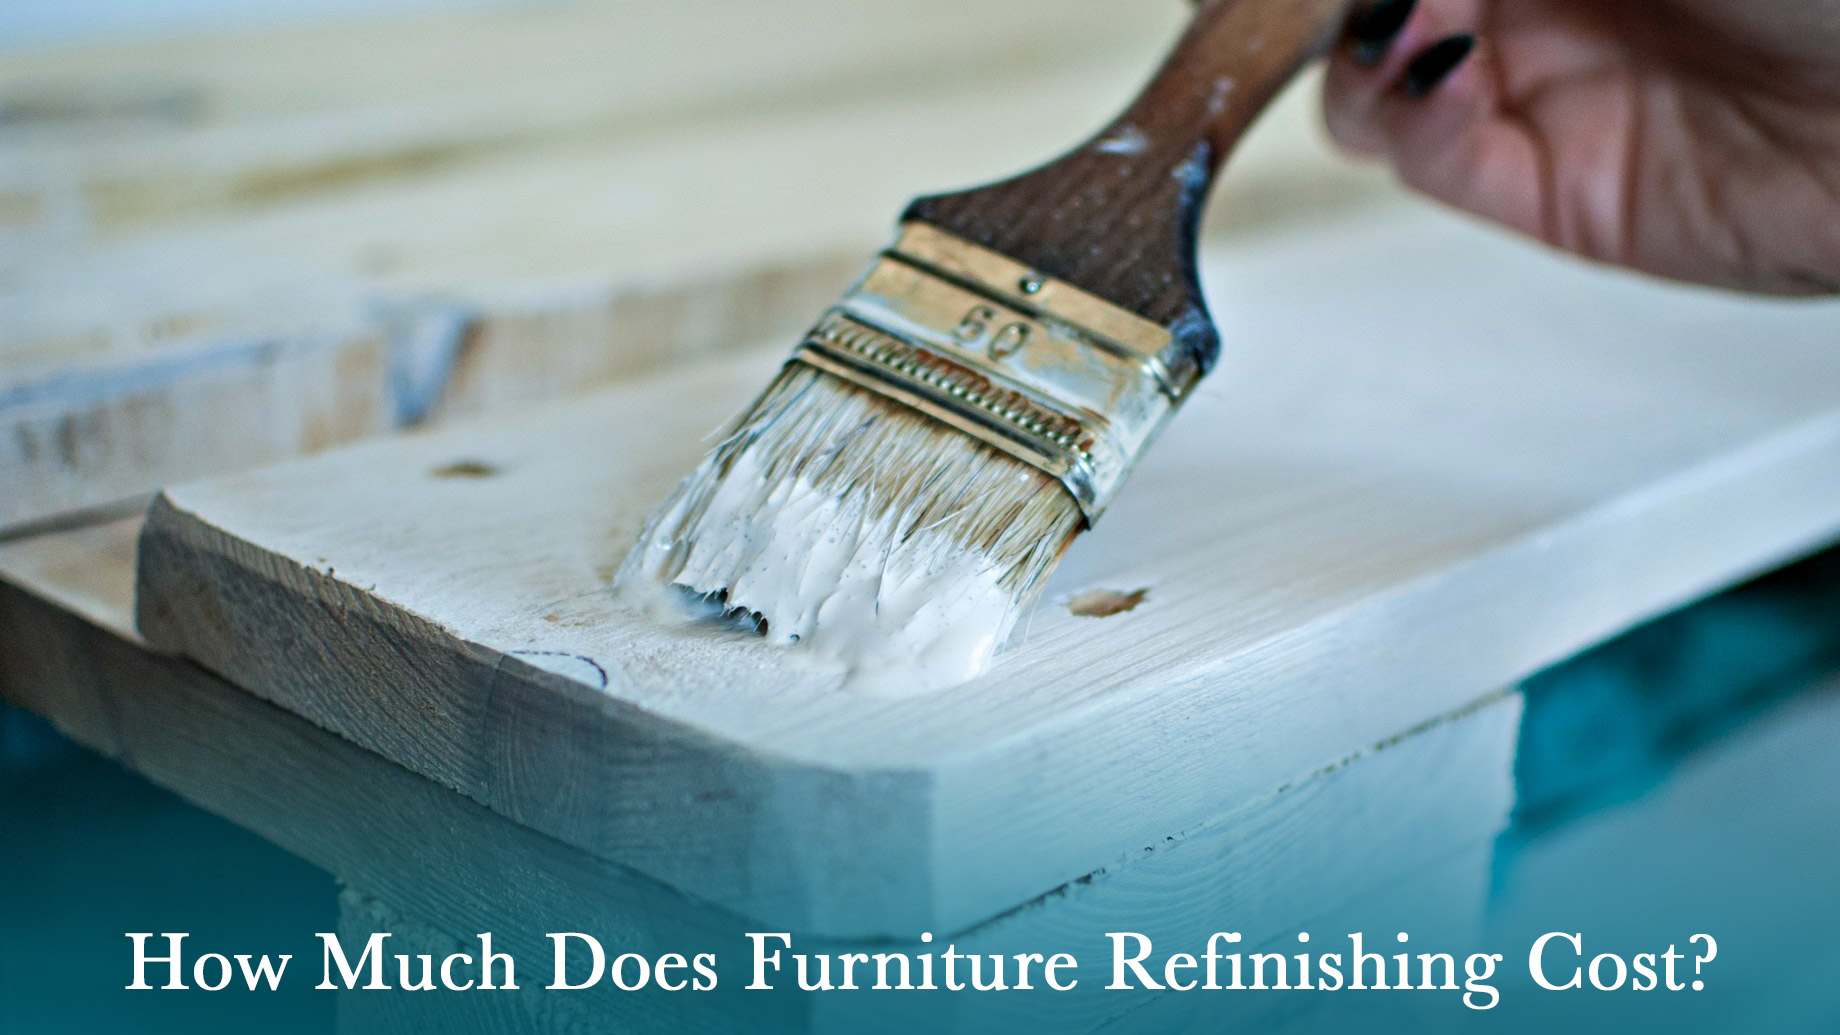 How Much Does Furniture Refinishing Cost?